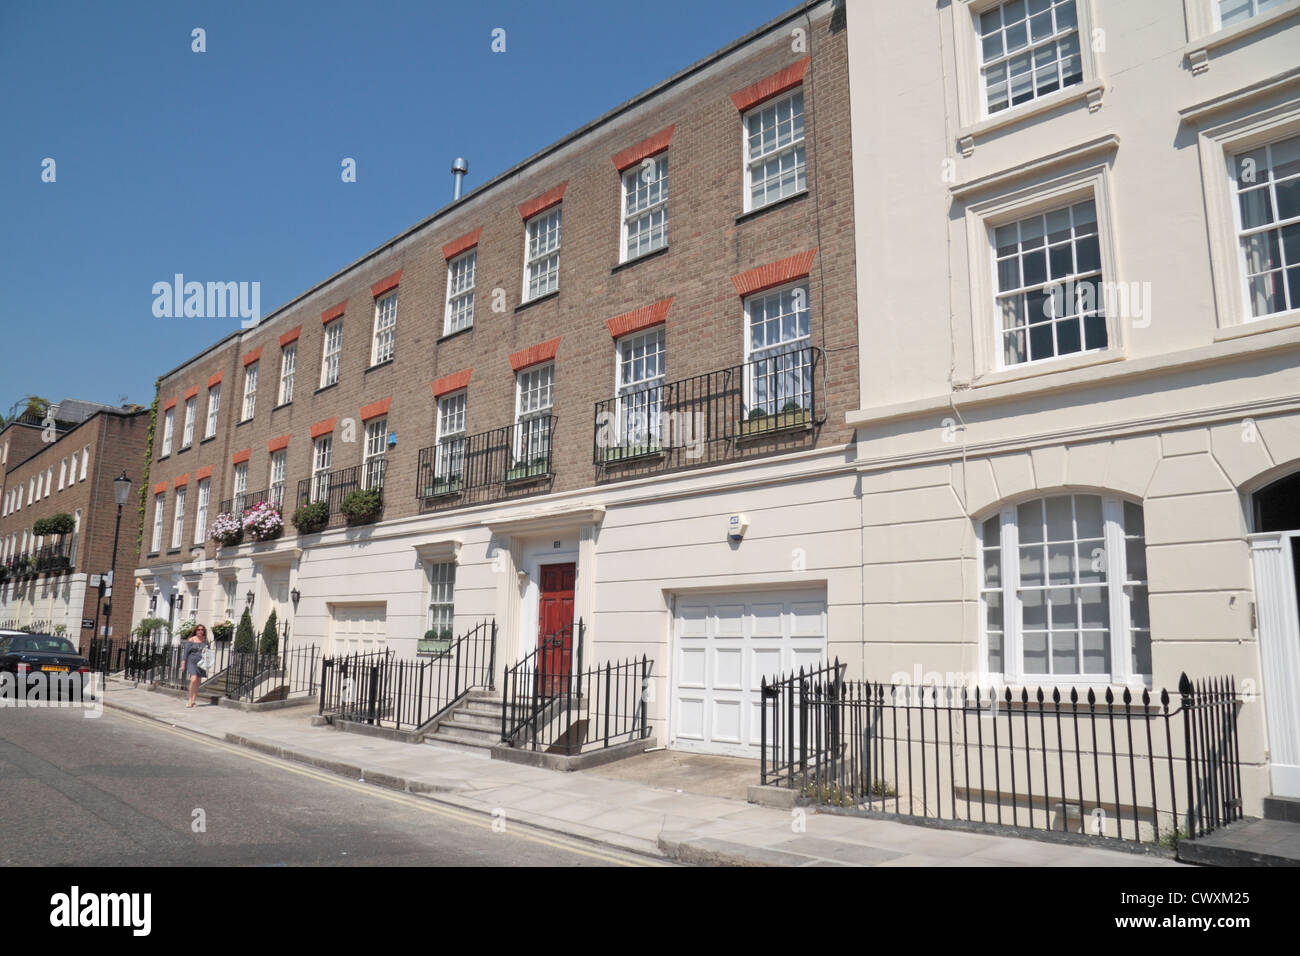 View of residential properties on Bourne Street, Belgravia, City of Westminster, London, SW1W, UK. Stock Photo